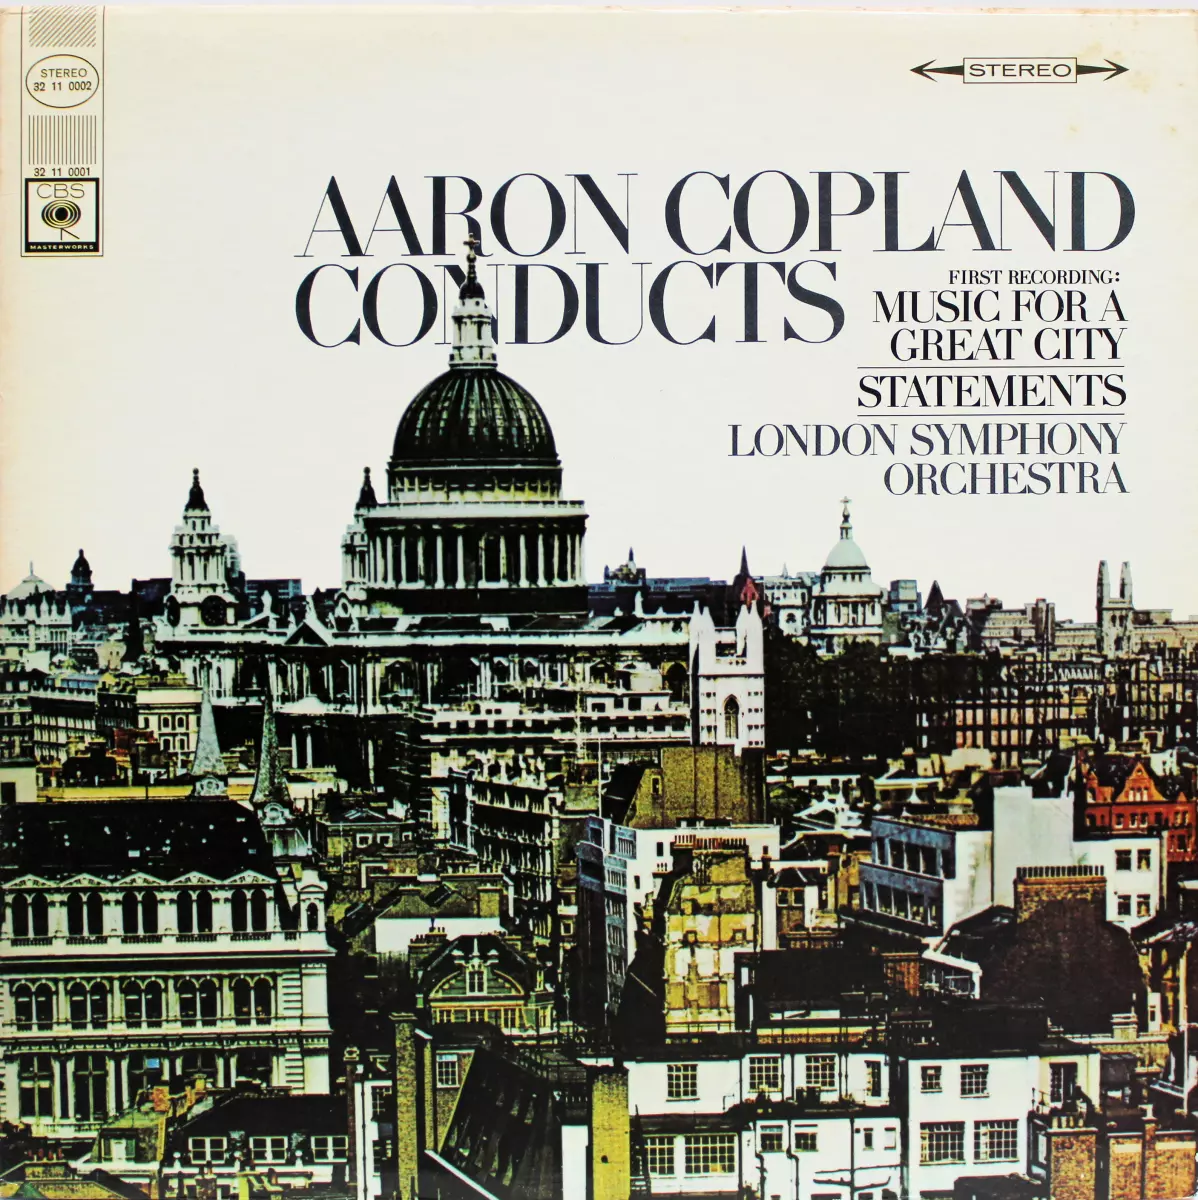 aaron-copland-conducts-music-for-a-great